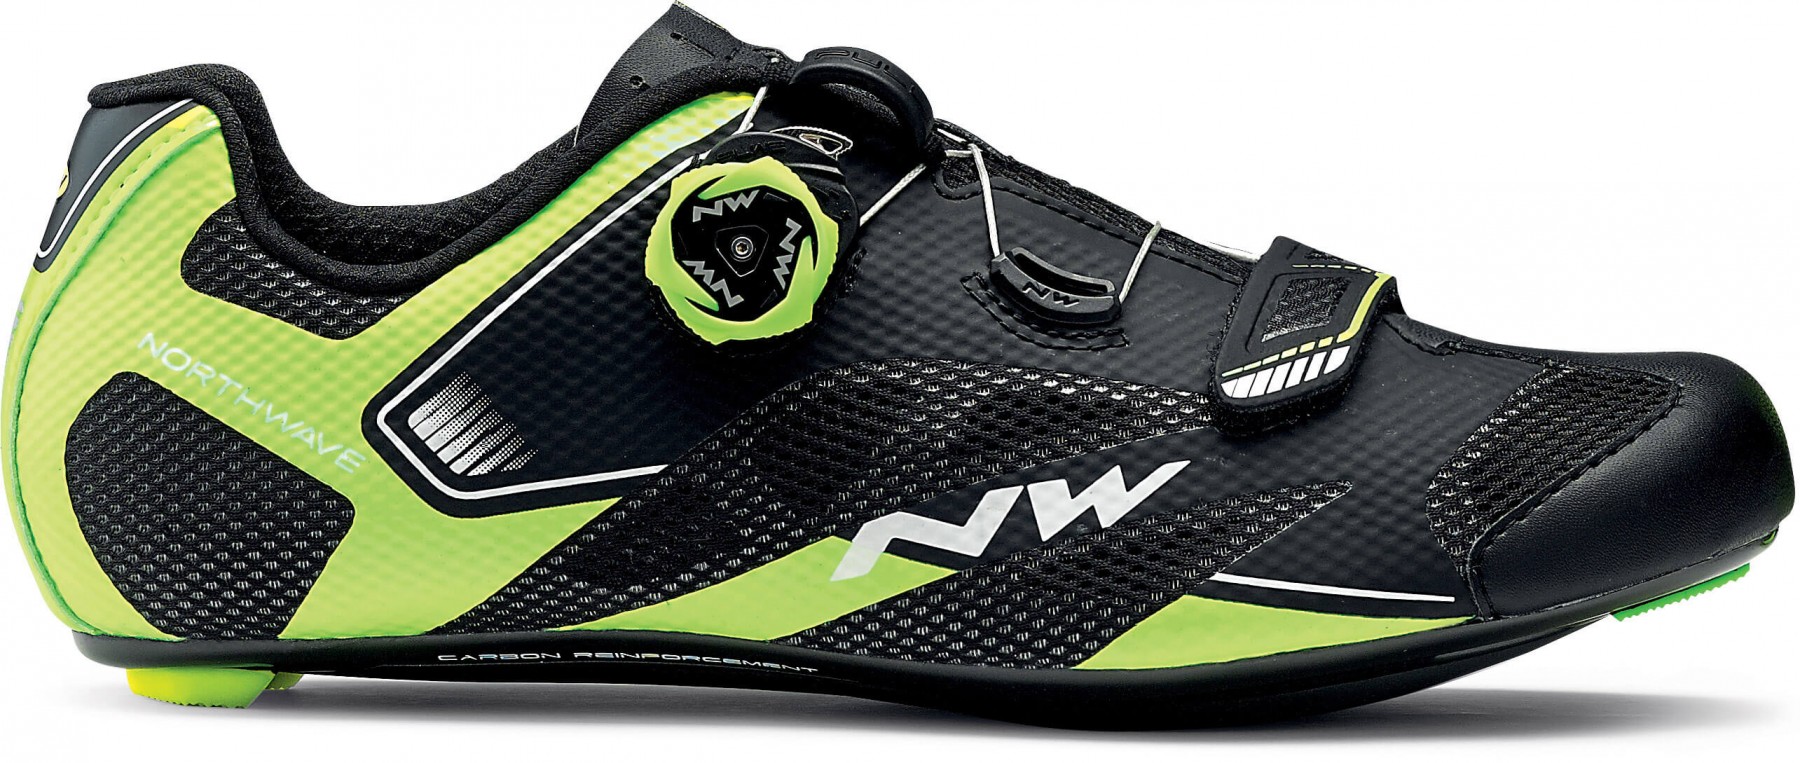 Northwave Sonic 2 Road Shoe Black/White/Yellow Fluo Eur 40/US 7.5 